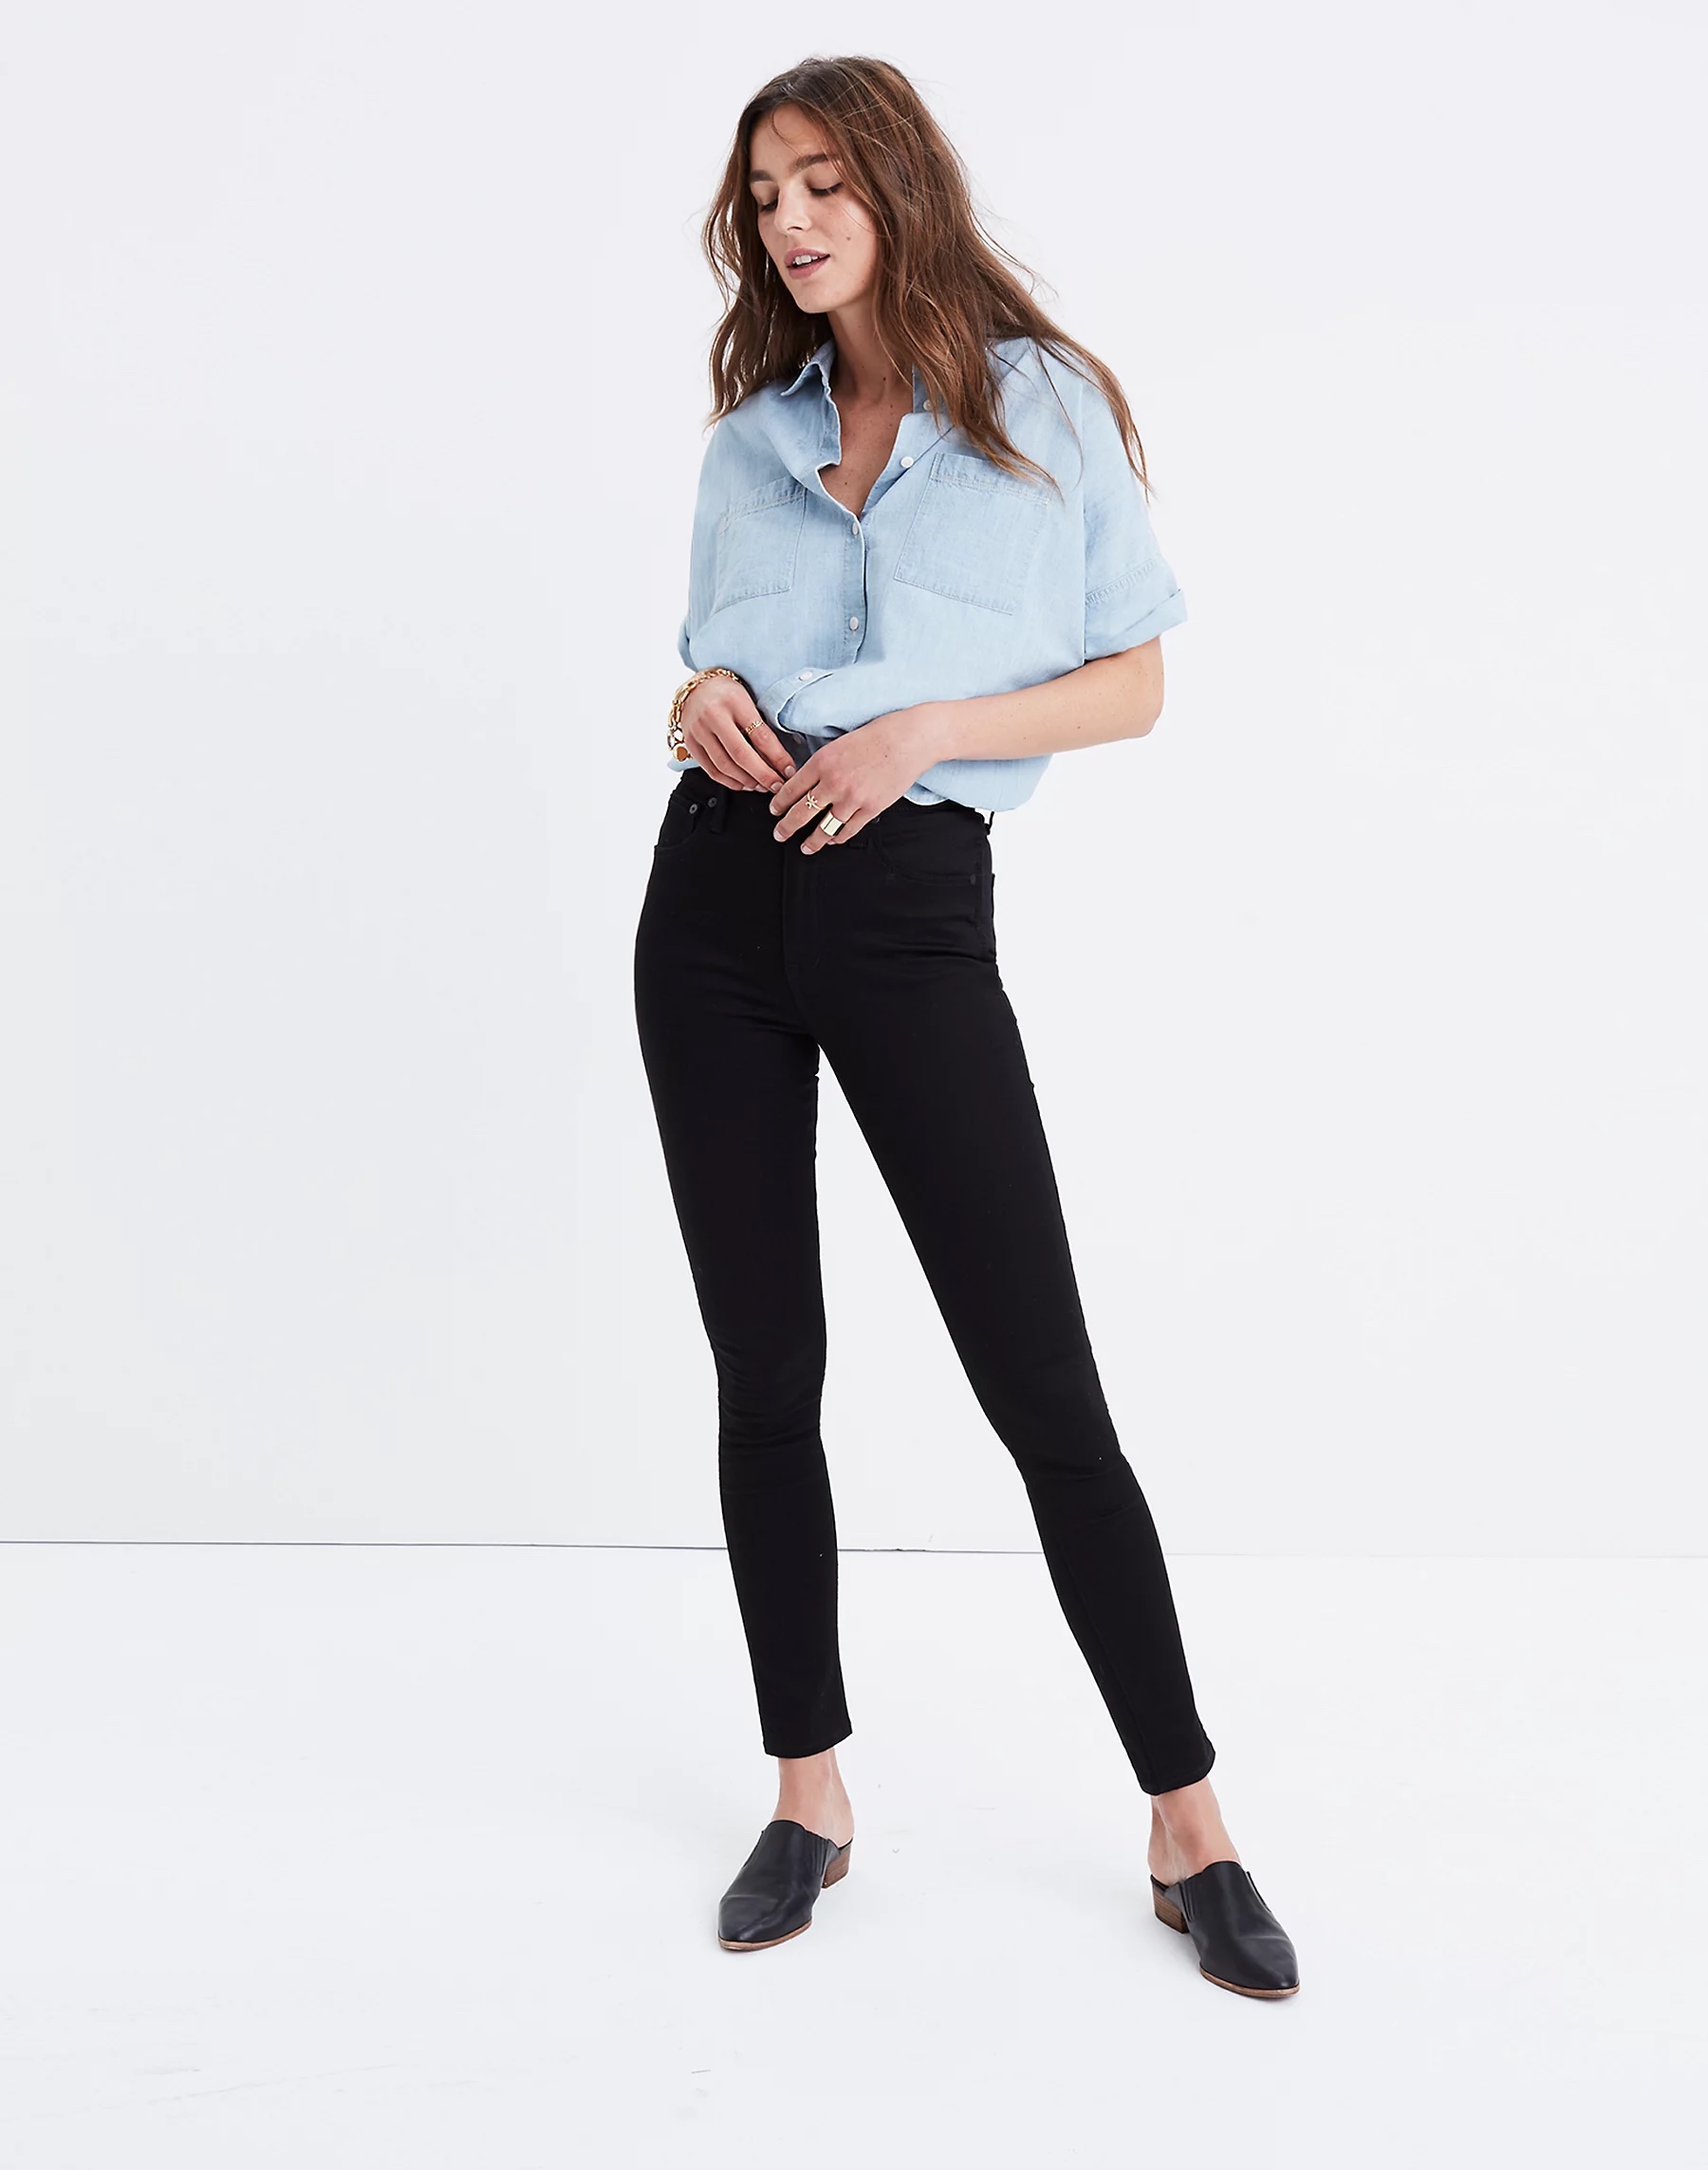 8 Fall Skinny-Jean Outfits to Wear in 2021 | Who What Wear